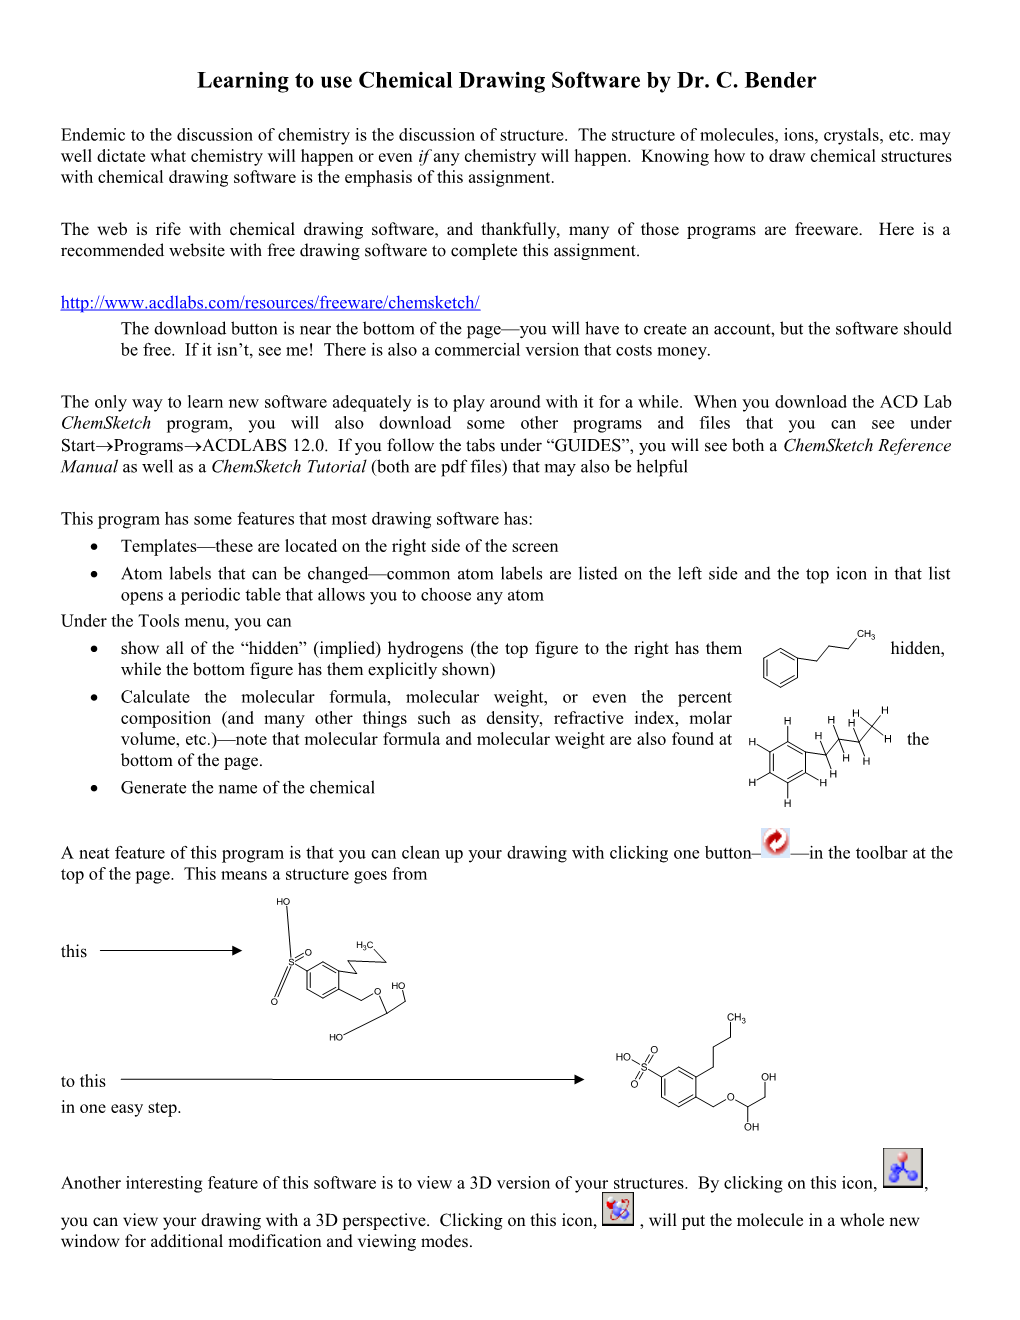 Learning to Use Chemical Drawing Software by Dr. C. Bender